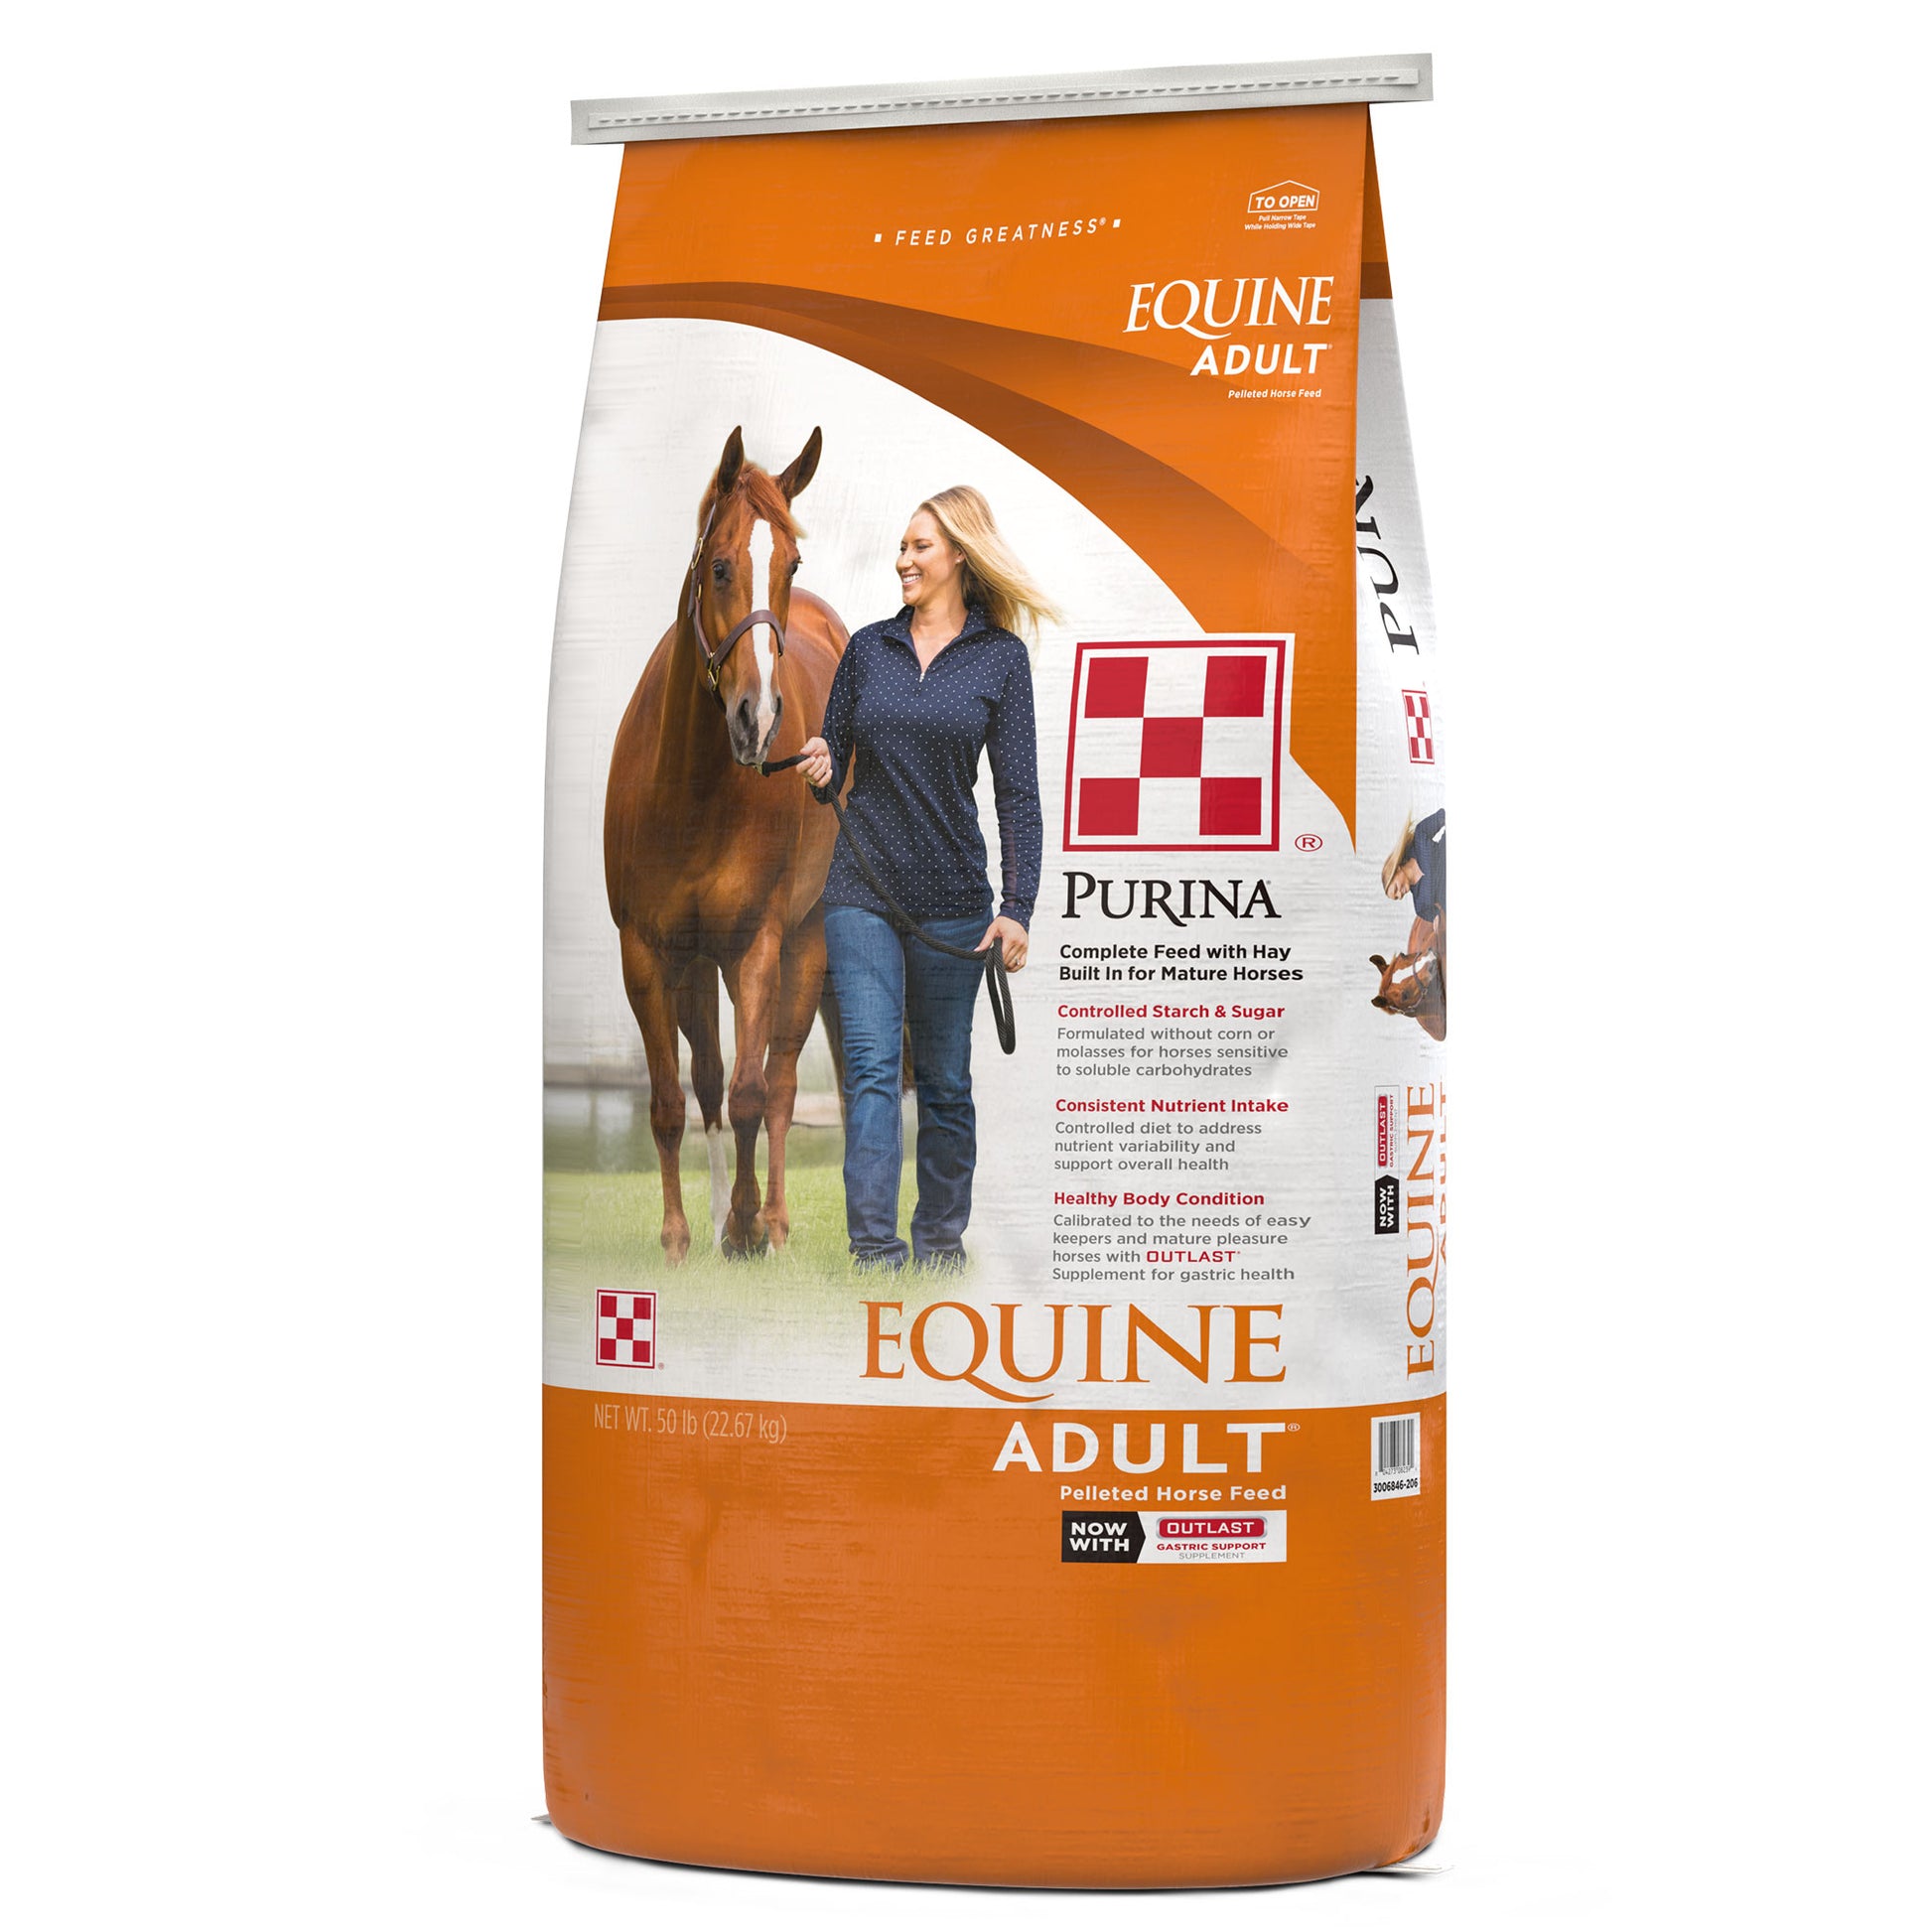 Right angle of Purina Equine Adult Feed 50 pound Bag